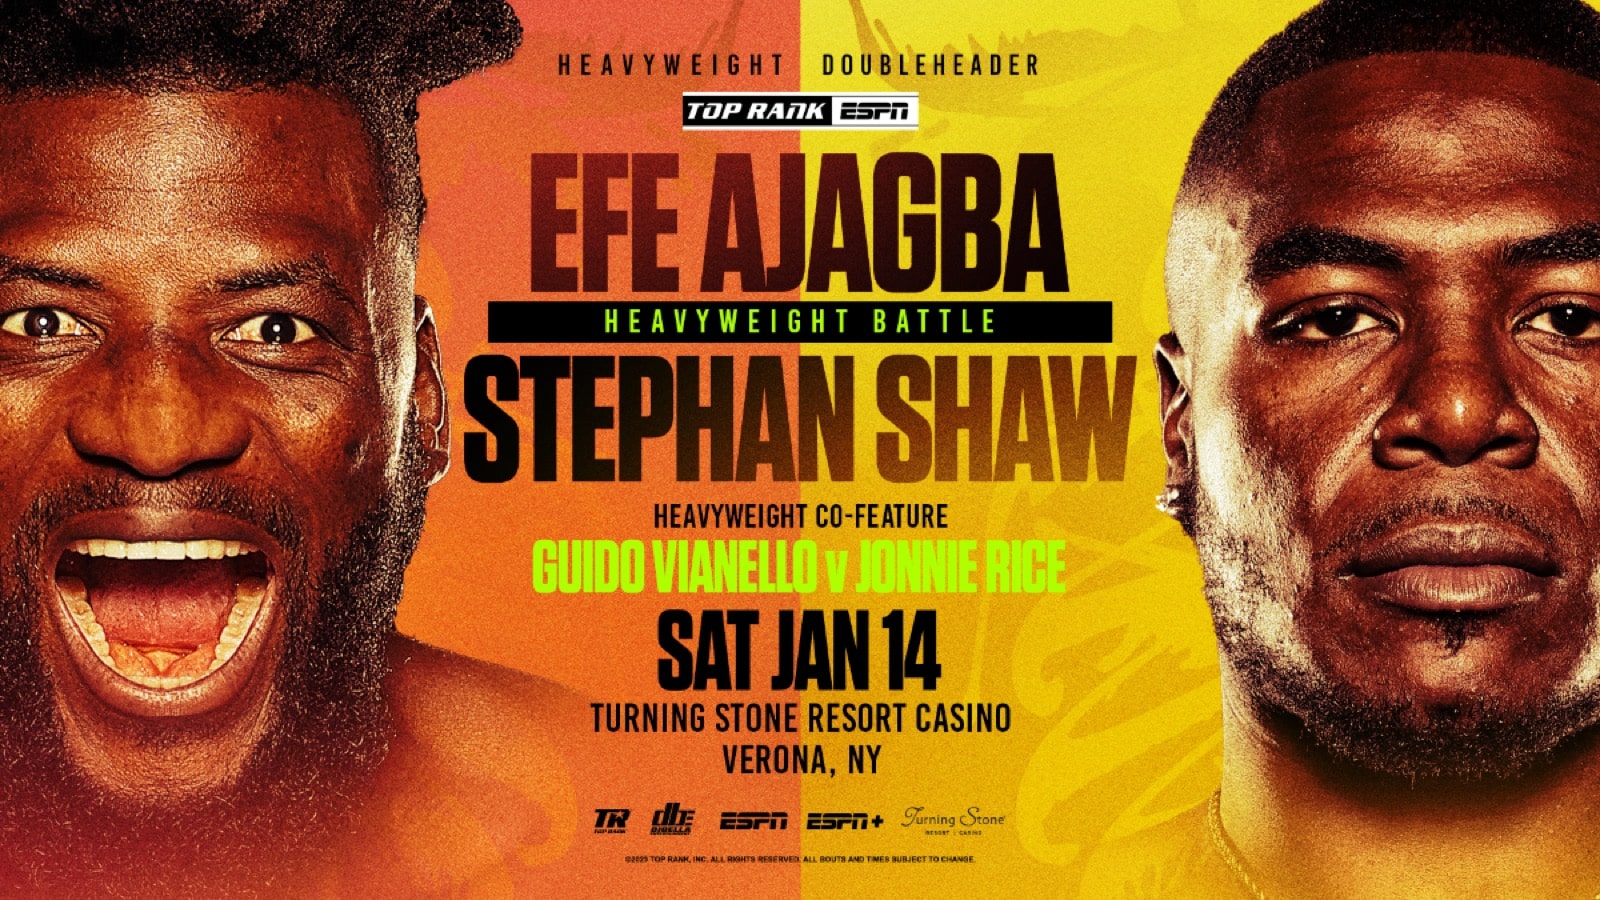 Stephan “Big Shot” Shaw Steps In To Face Efe Ajagba